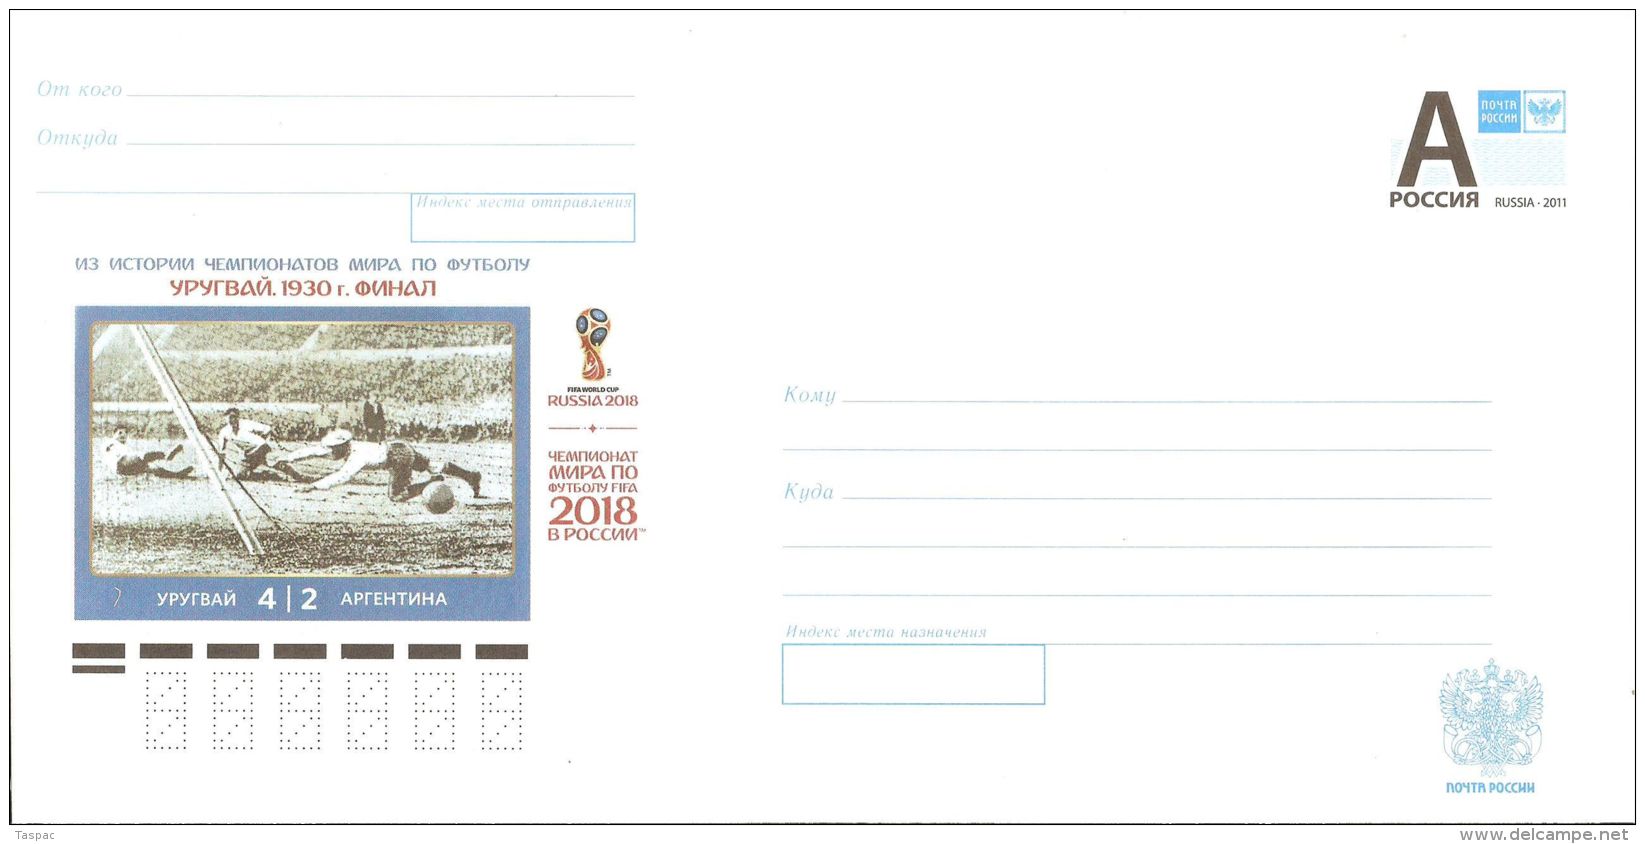 Russia 2015 # 148 Postal Stationery Cover Unused - History Of World Cup Soccer Championship, Uruguay 1930 - 2018 – Russia